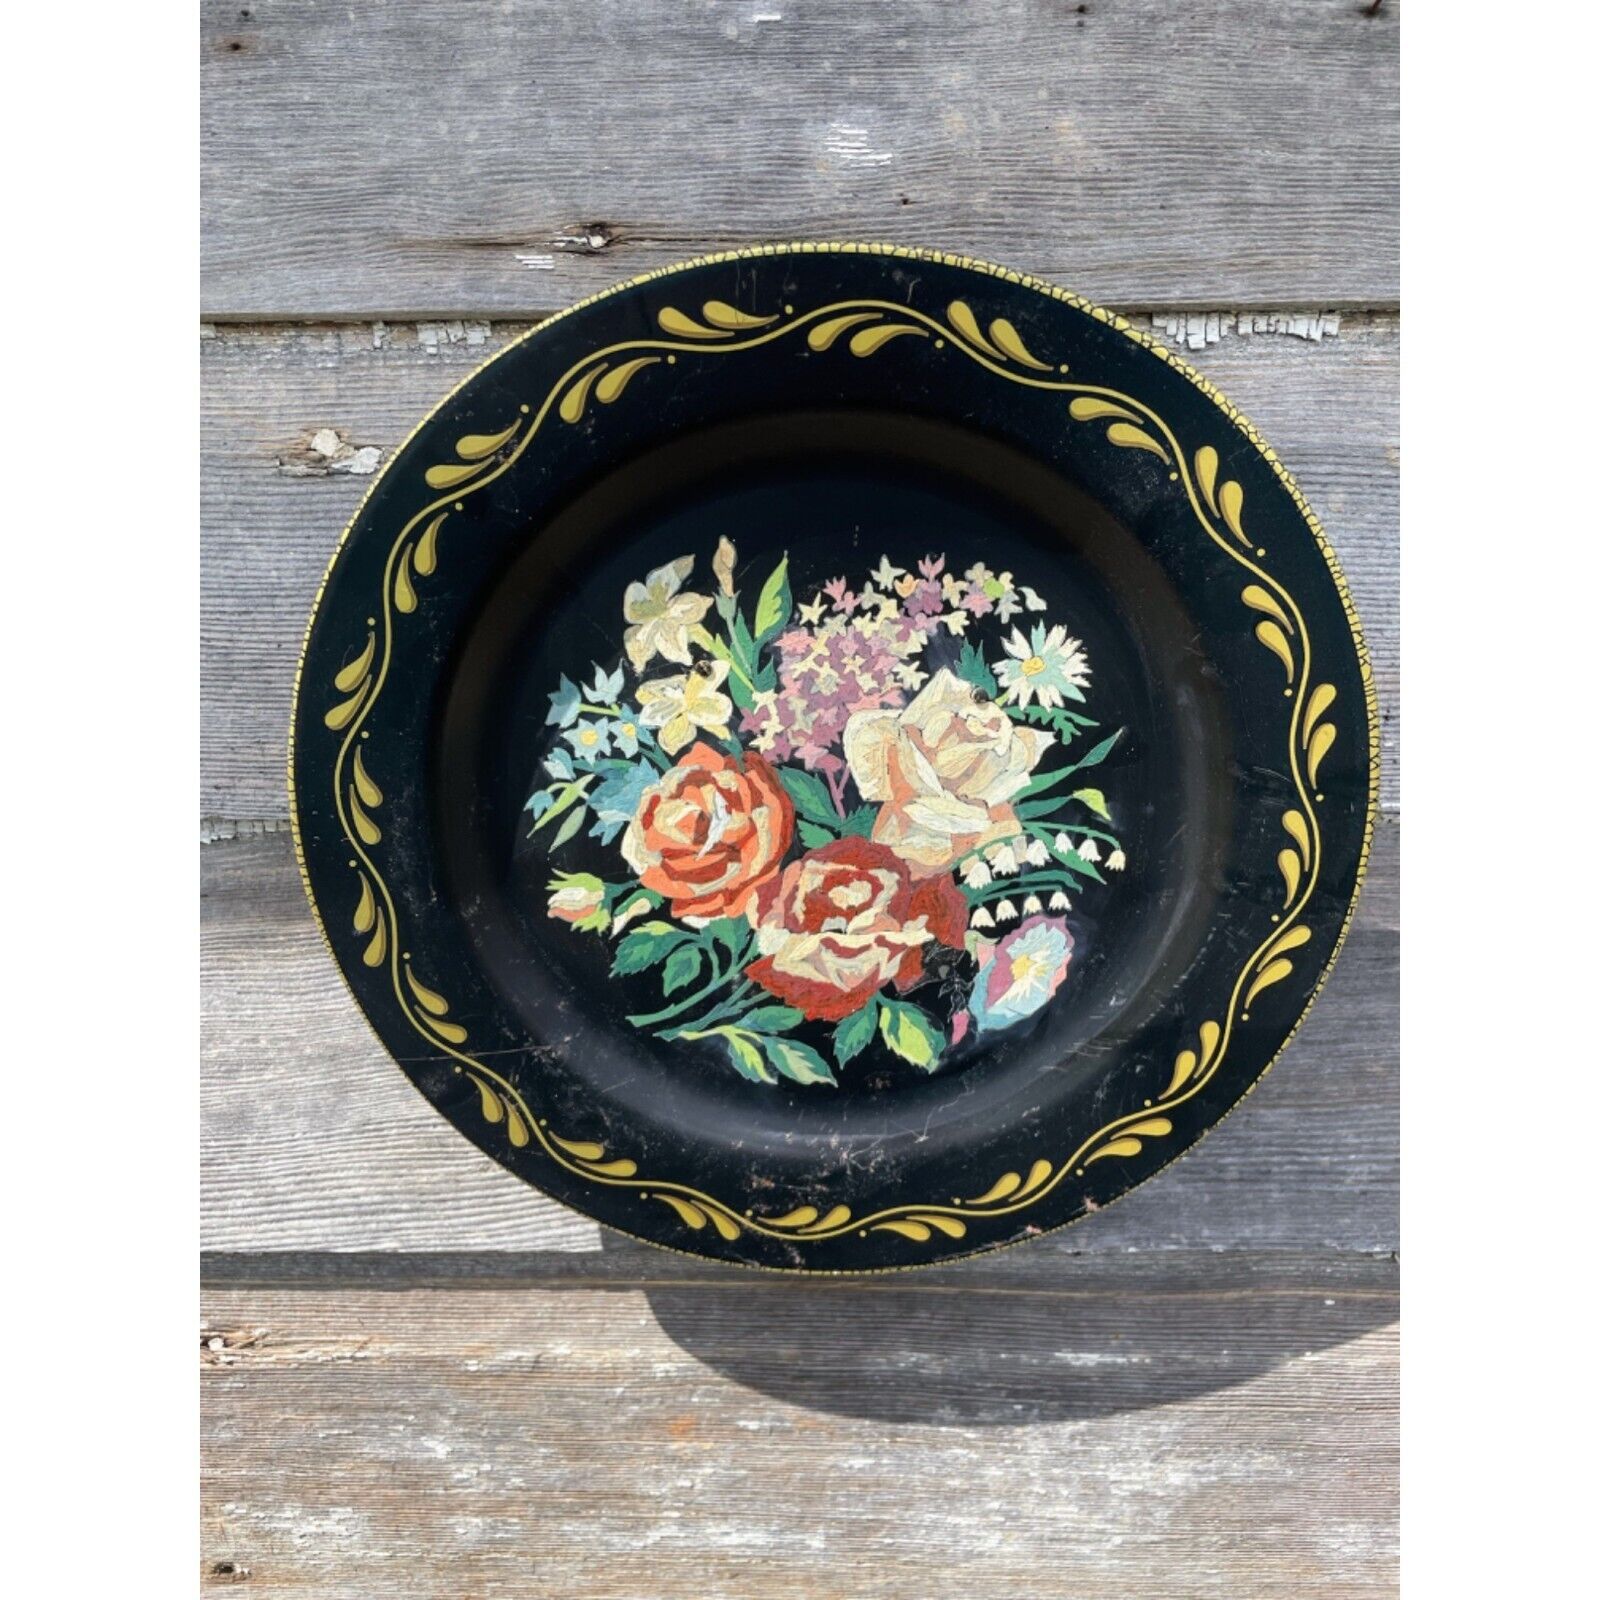 Antique 1930s Metal Toleware Hand Painted wall Plate Roses Flowers